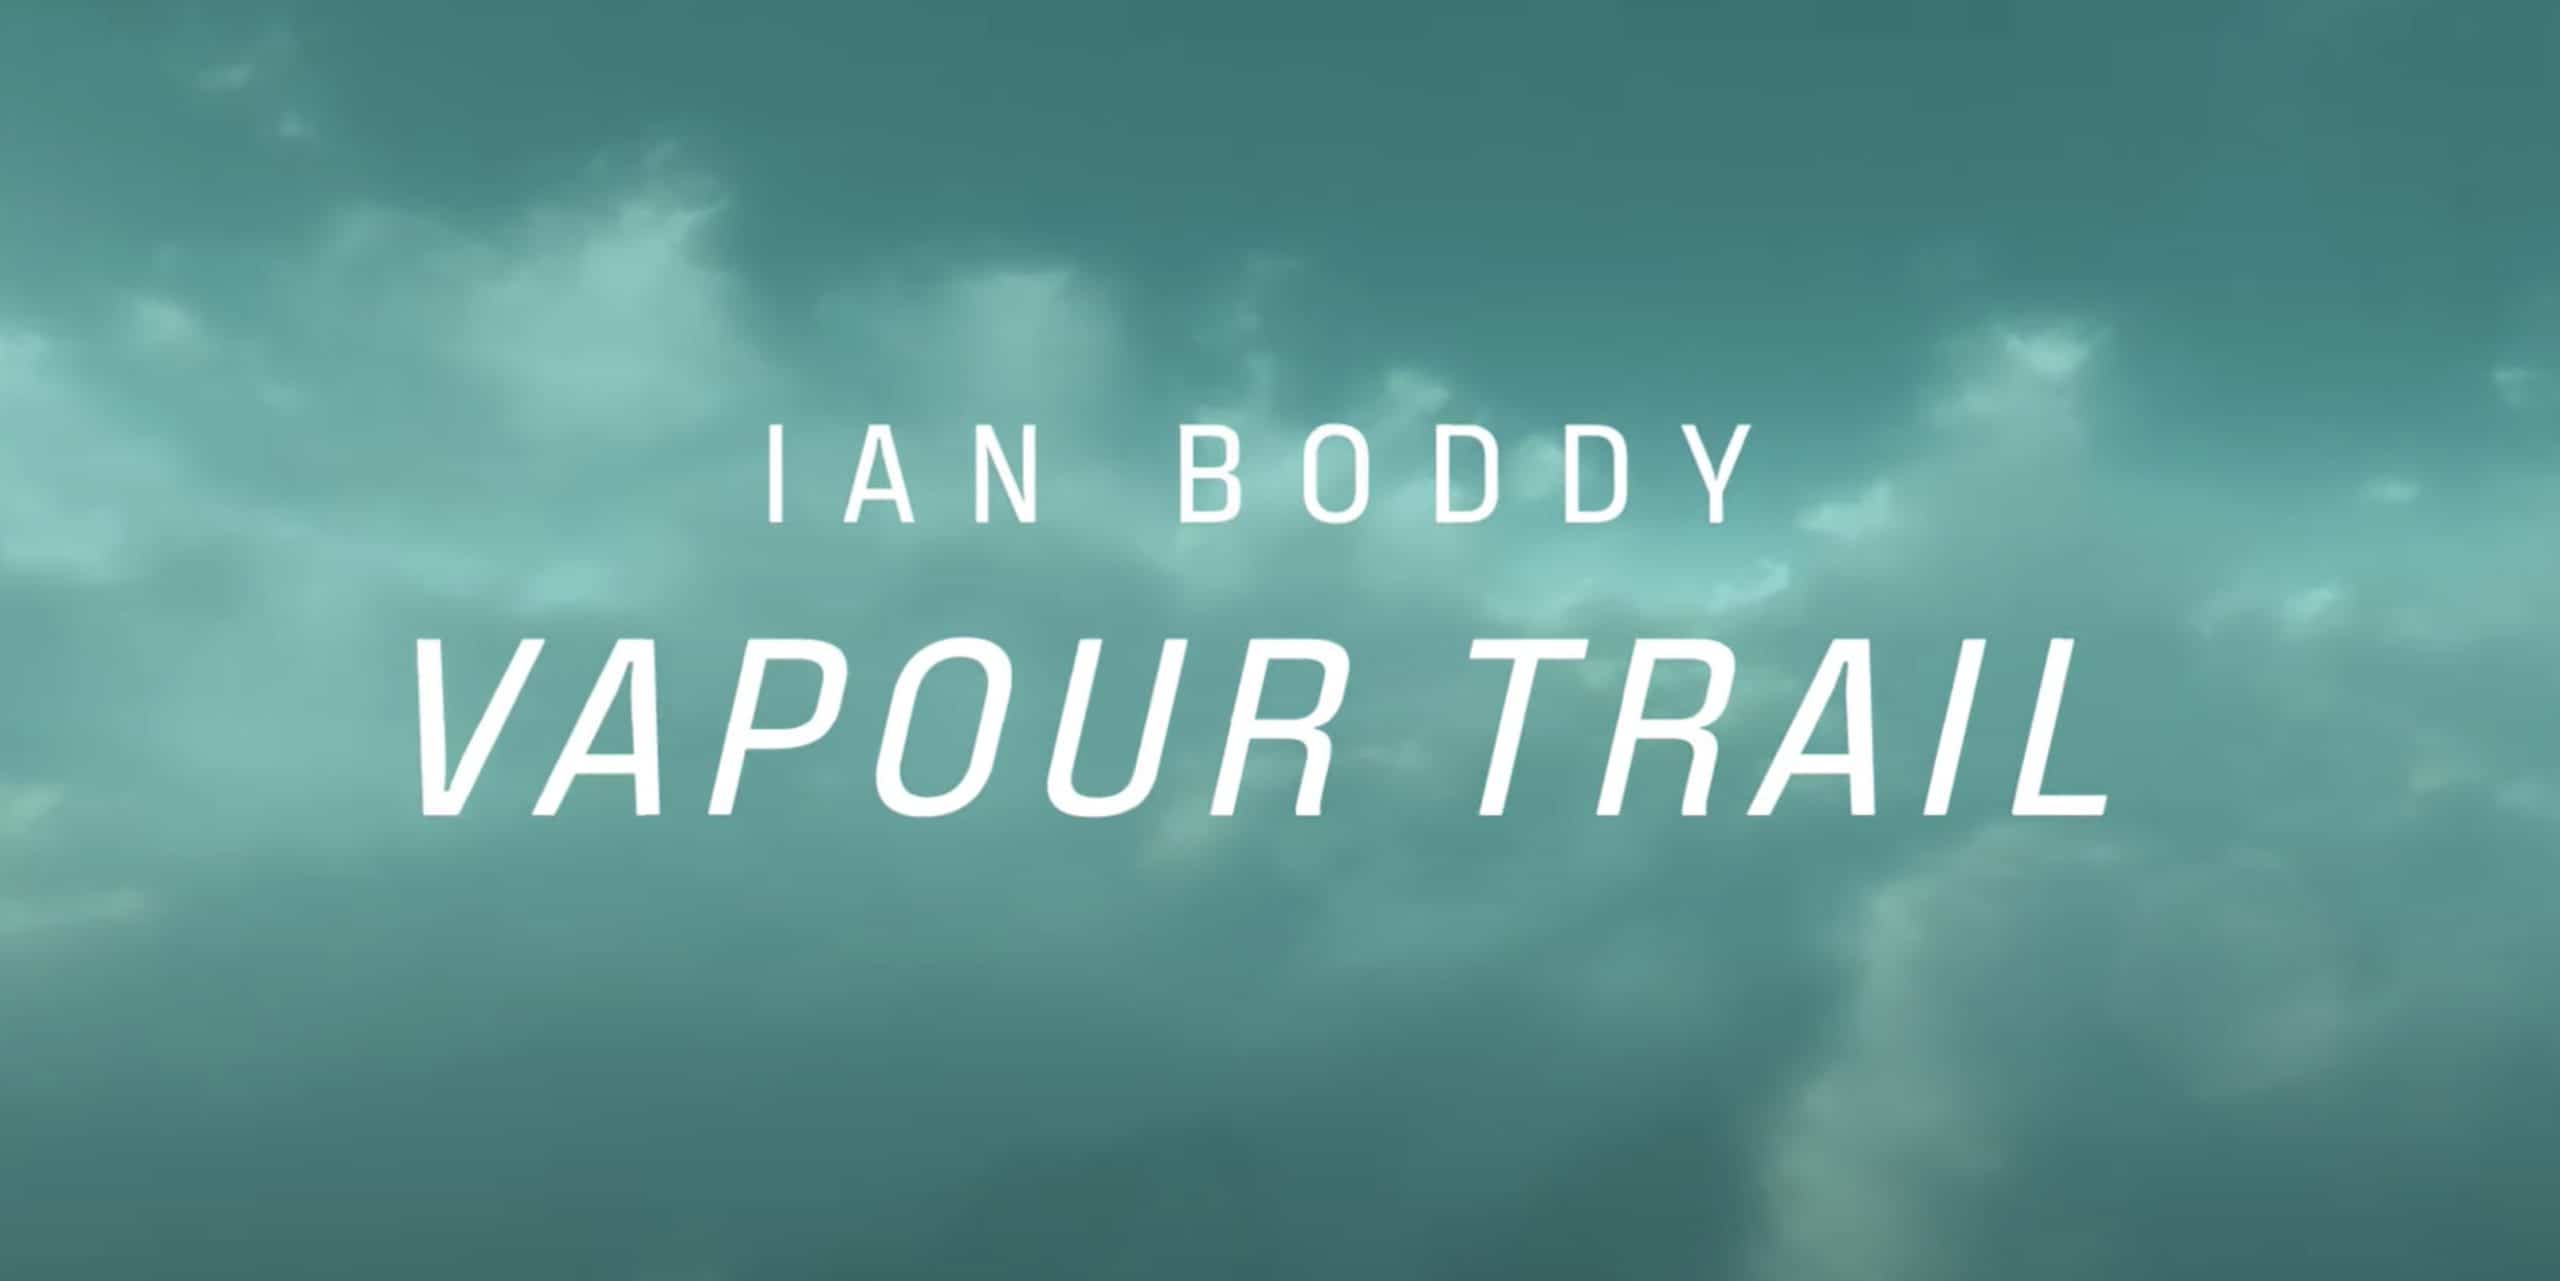 New Sound Pack Ian Boddy Vapour Trail for The Attic 2 by Soniccouture scaled